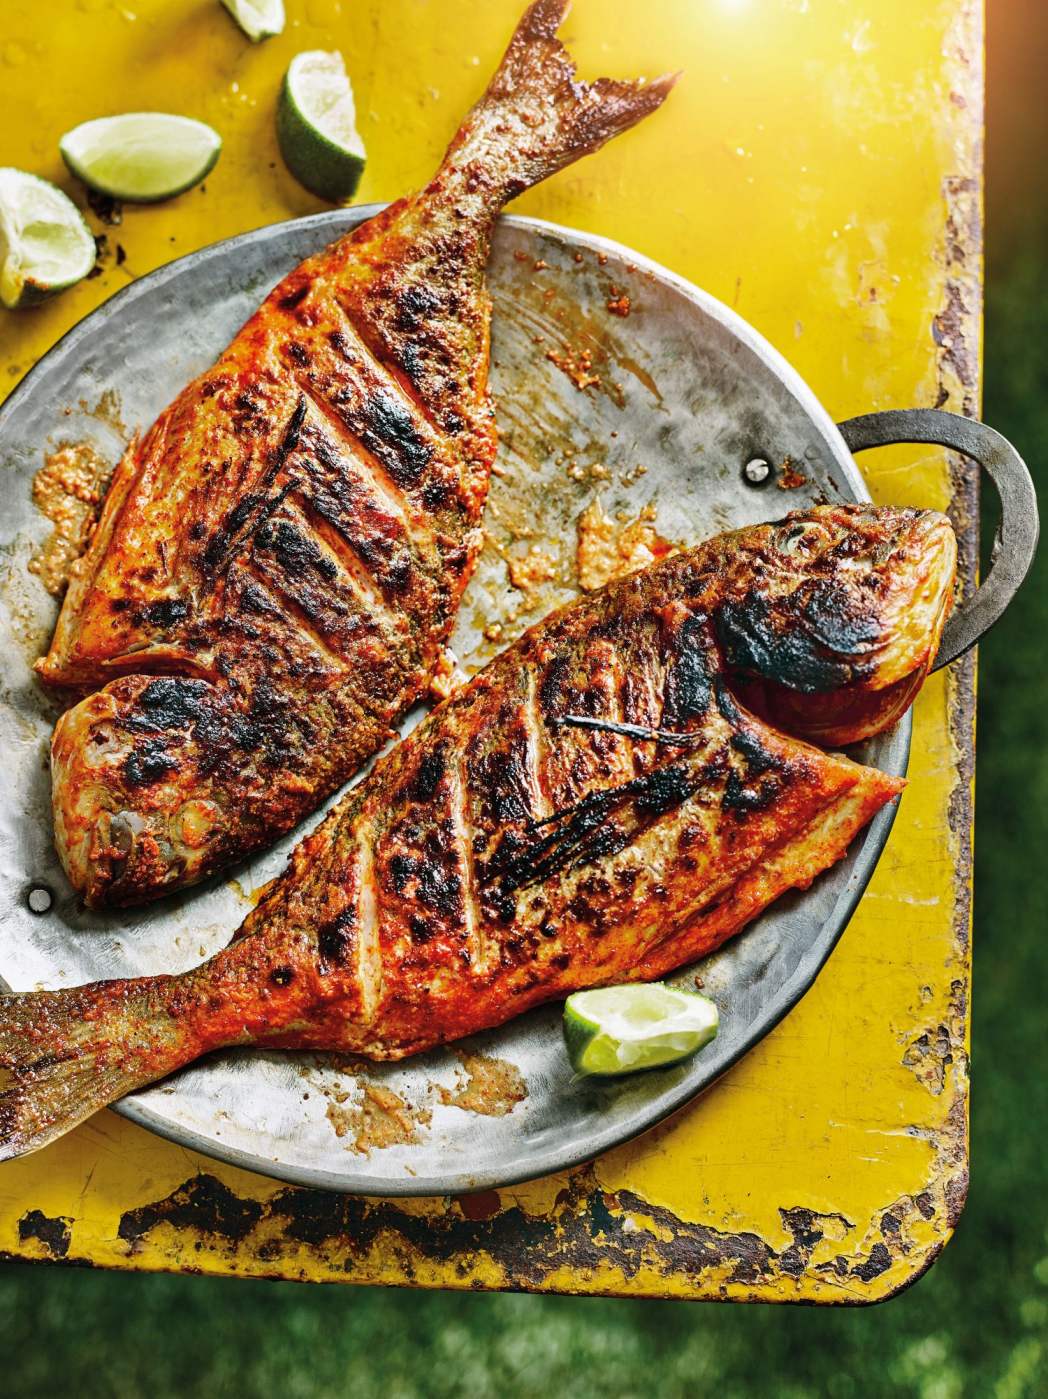 Image for blog - 10 sizzling barbecue recipes